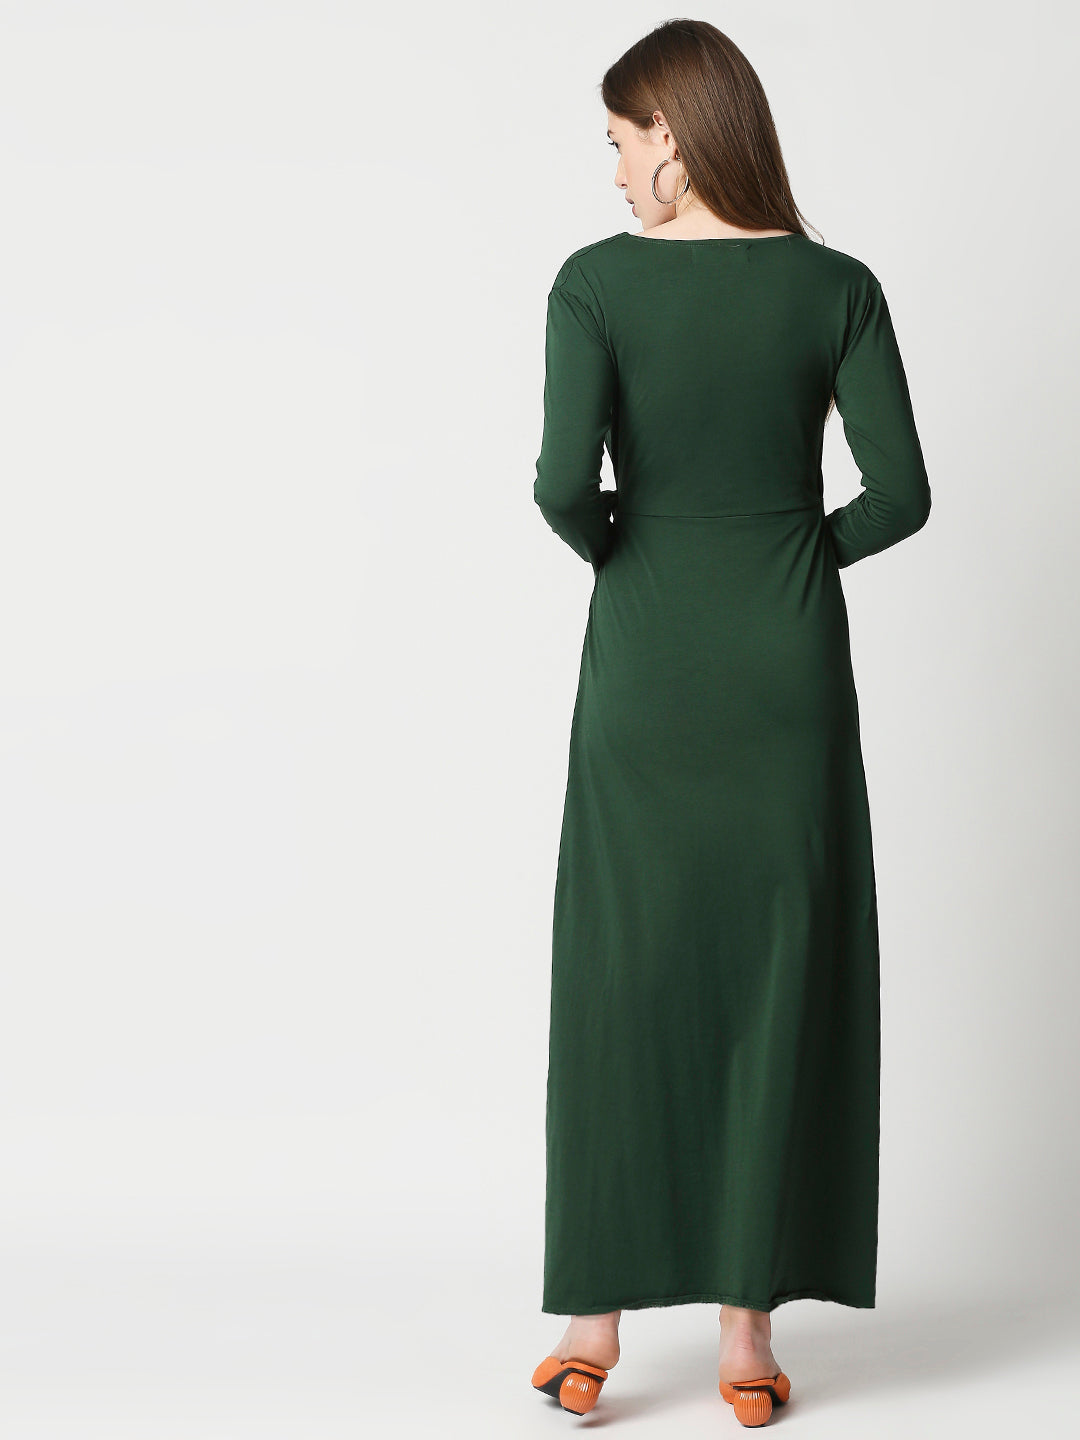 Buy Womens Gown Bottle Green Color Full Sleeves